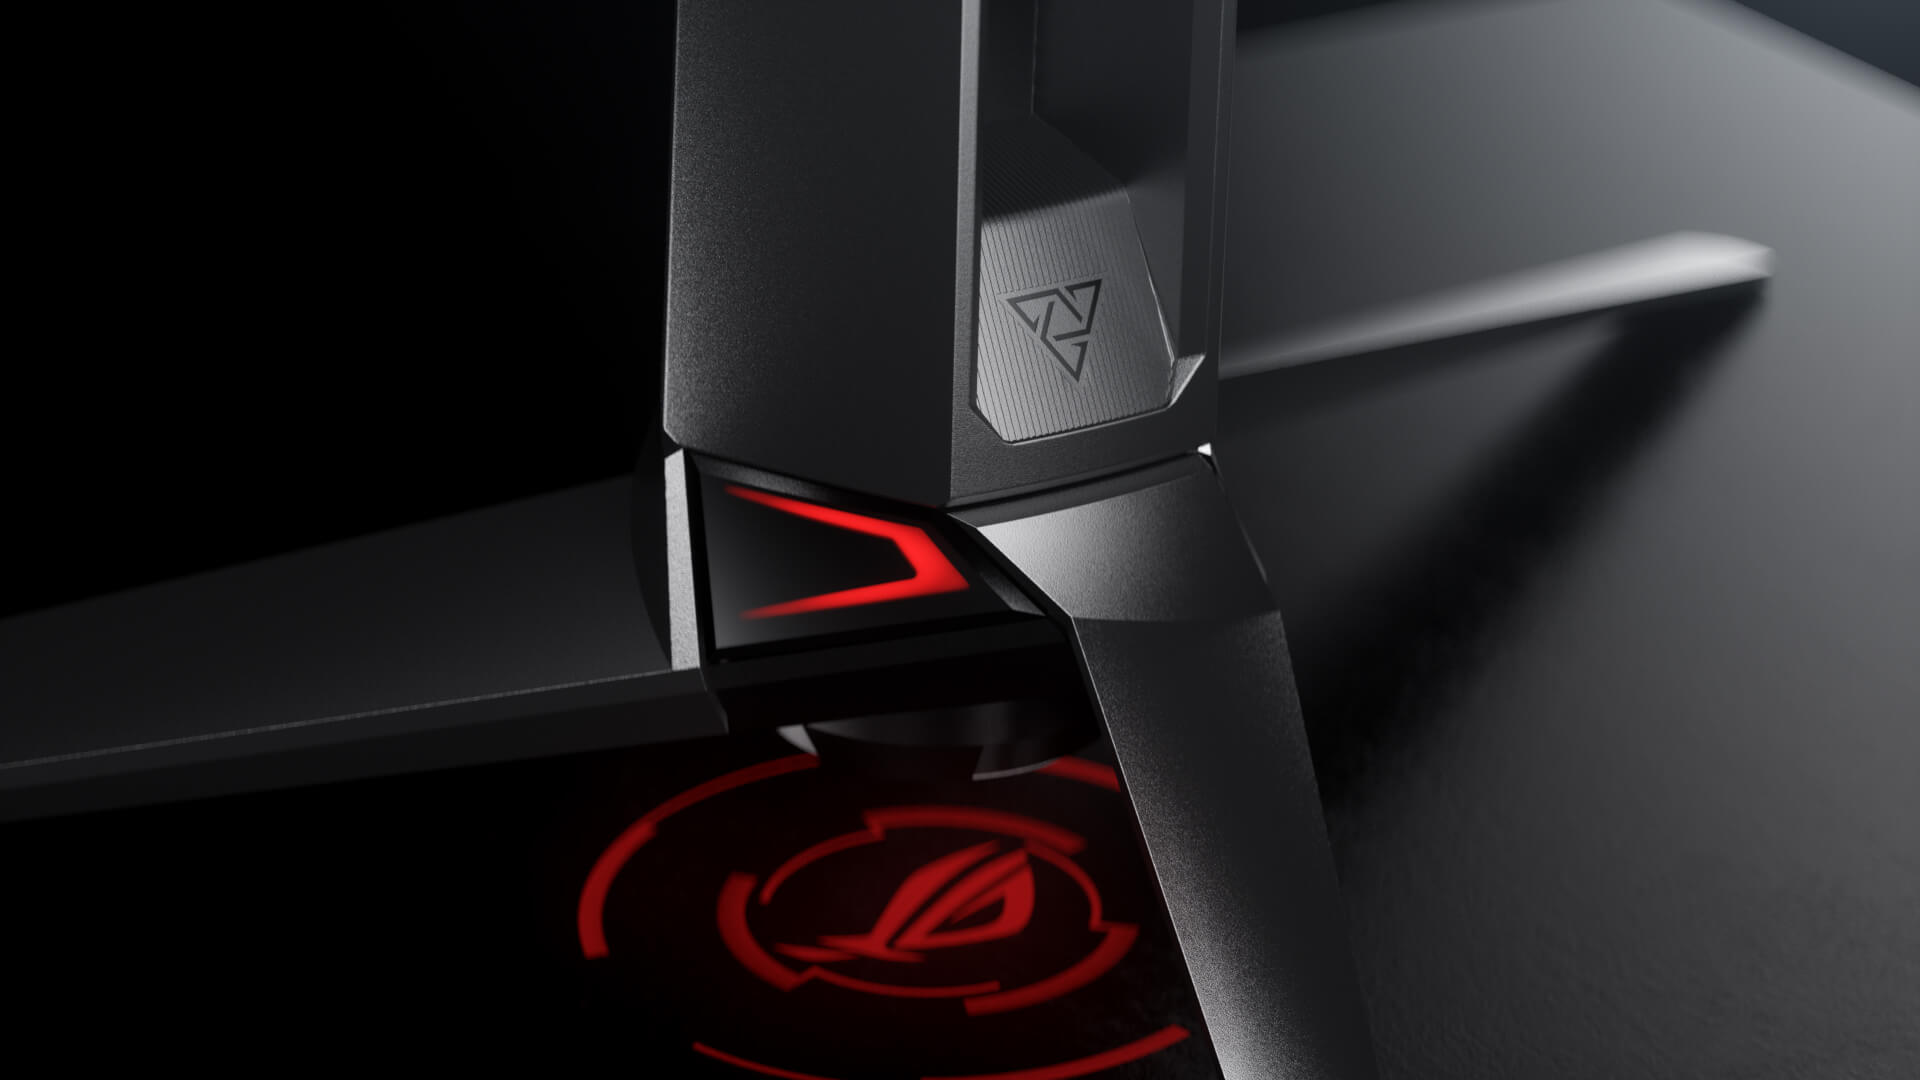 The ROG logo projection under the PG27AQDM.